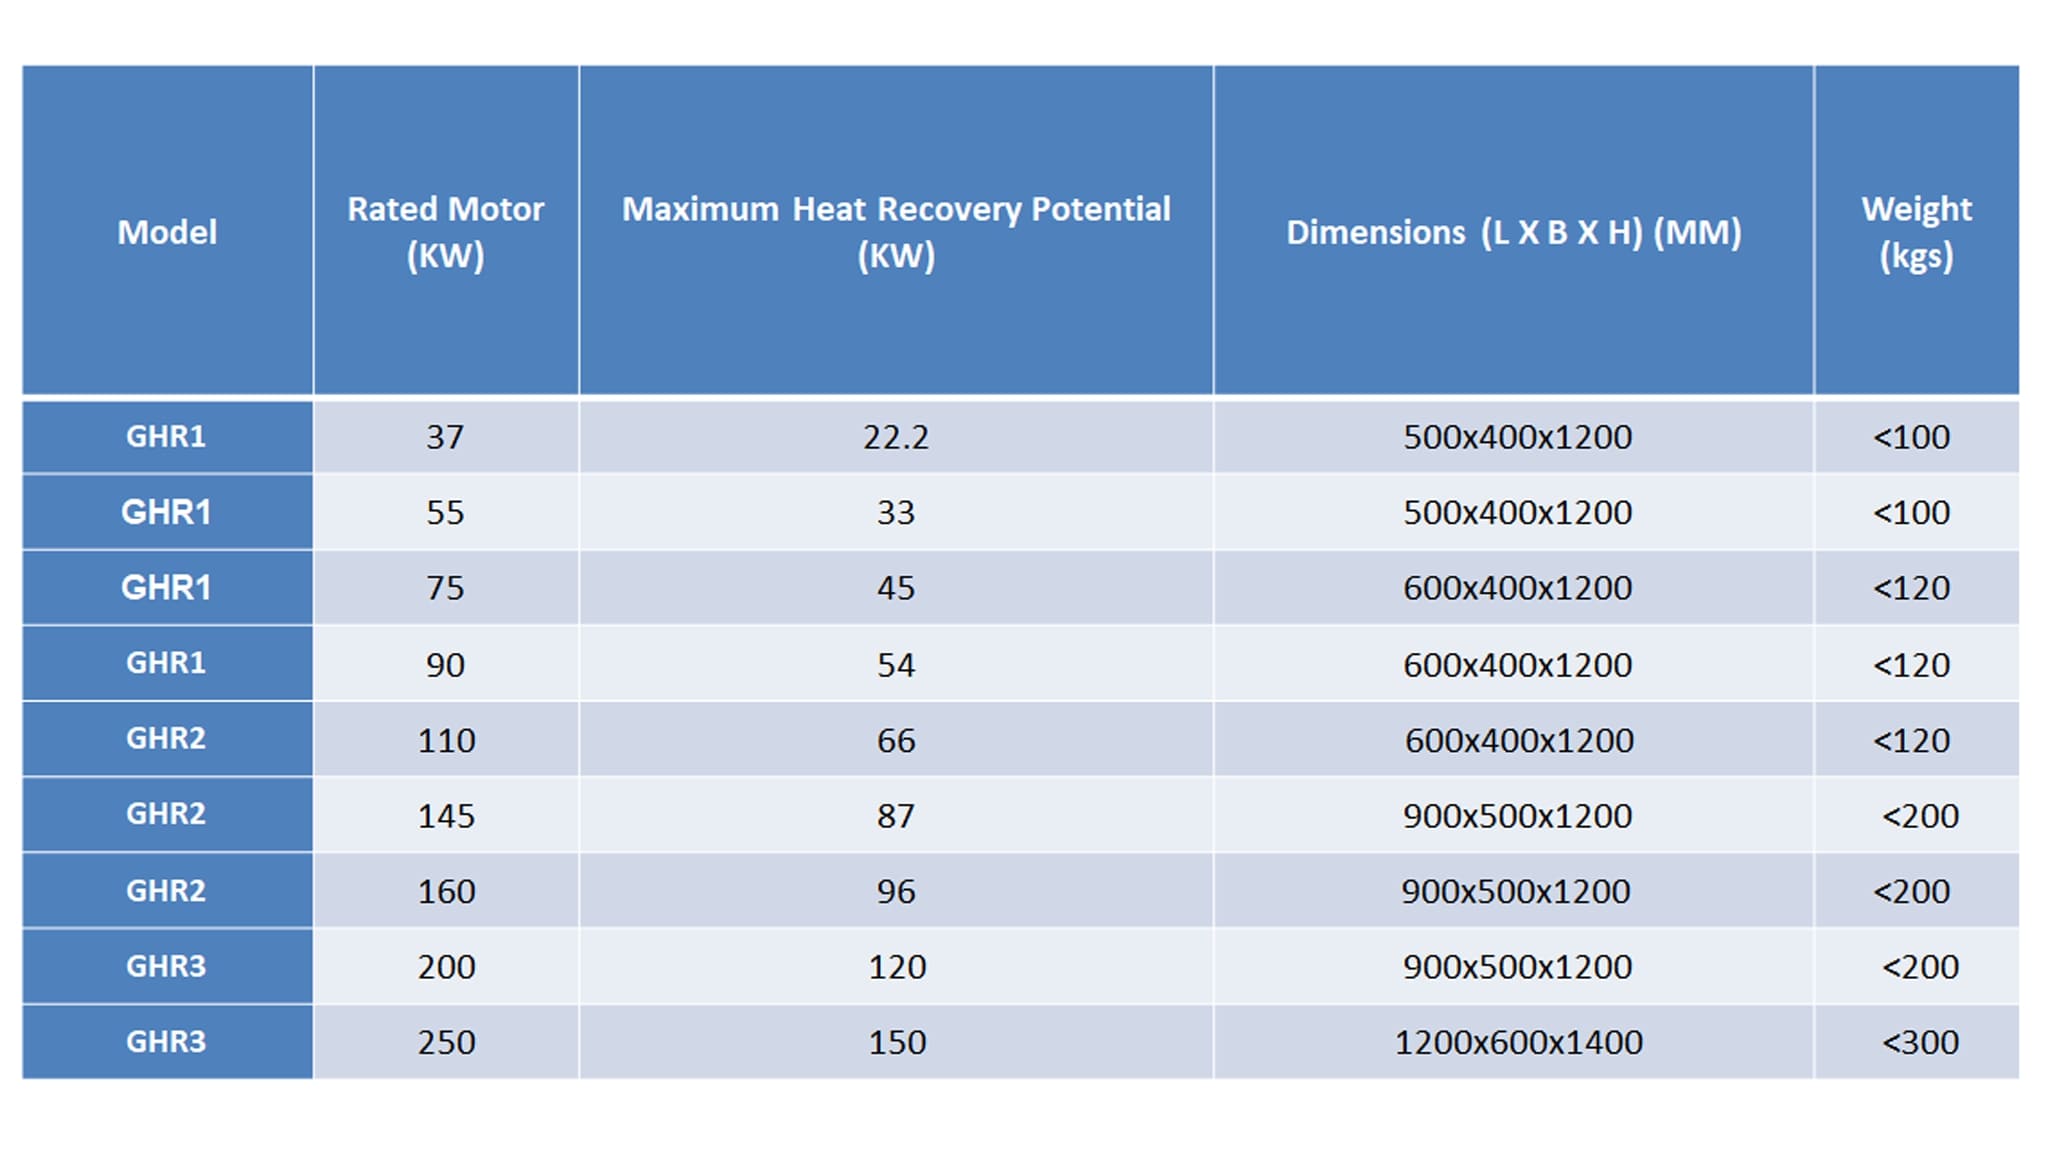 Model as Per Motor Rated KW-Godrej Heat Recovery System